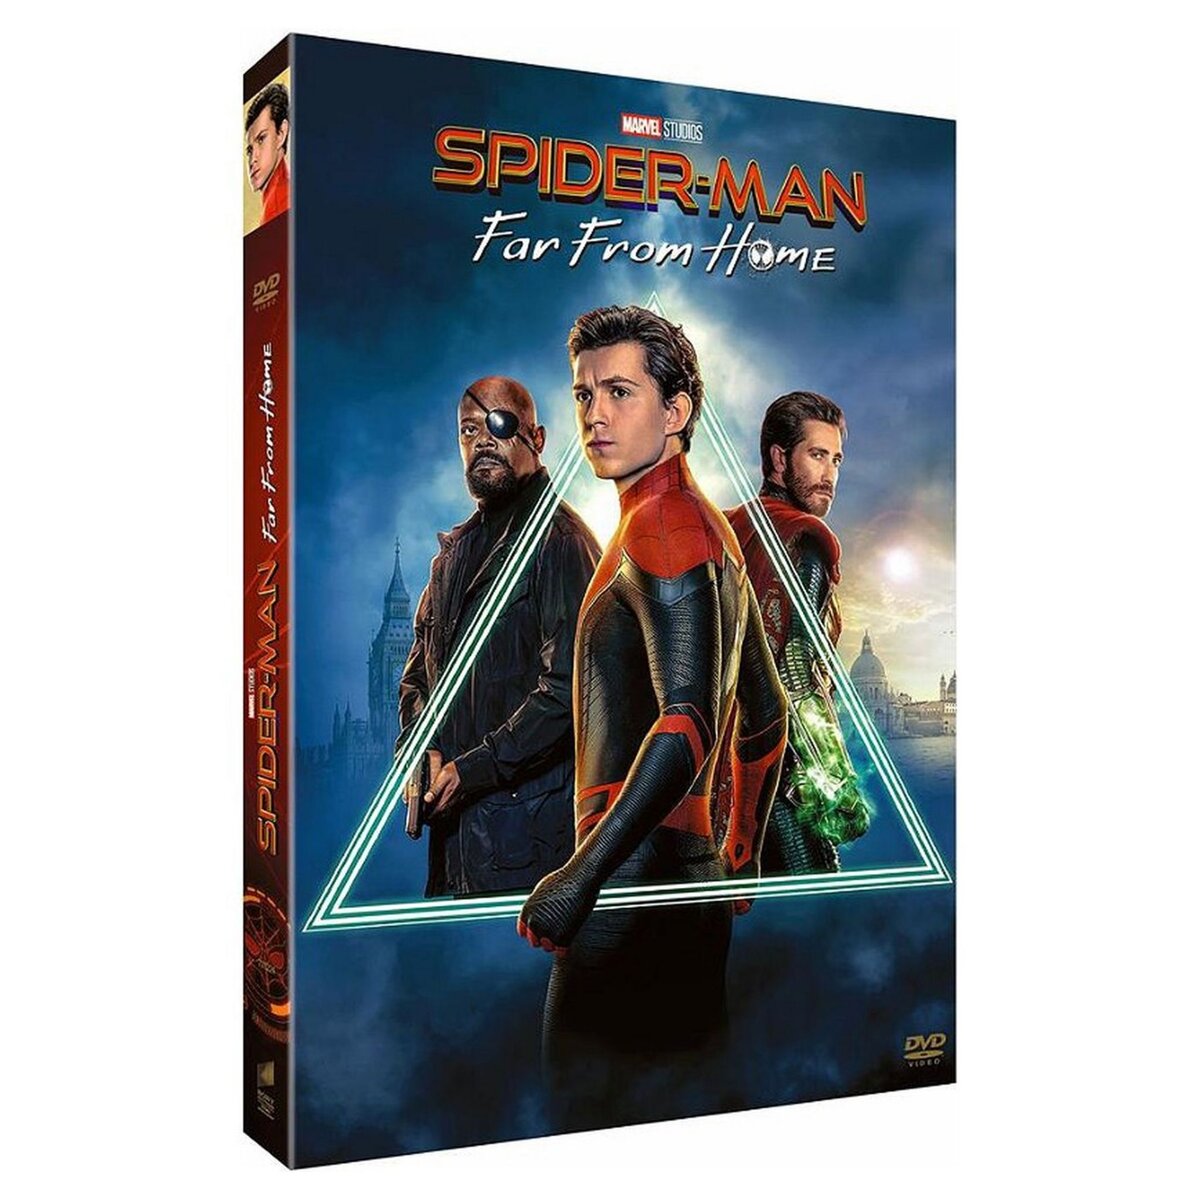 Spider-Man : Far From Home DVD